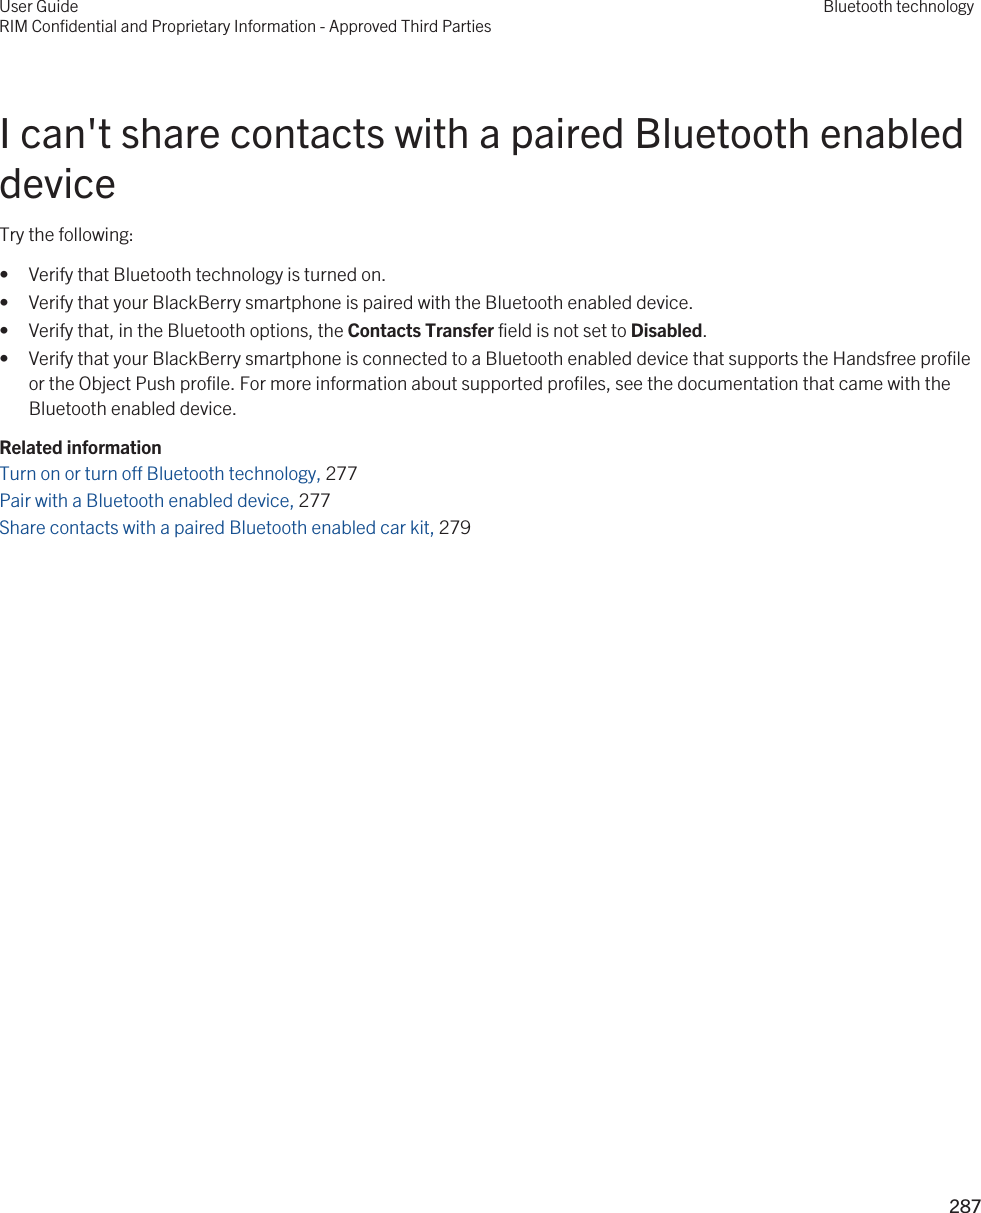 I can&apos;t share contacts with a paired Bluetooth enabled deviceTry the following:• Verify that Bluetooth technology is turned on.• Verify that your BlackBerry smartphone is paired with the Bluetooth enabled device.• Verify that, in the Bluetooth options, the Contacts Transfer field is not set to Disabled.• Verify that your BlackBerry smartphone is connected to a Bluetooth enabled device that supports the Handsfree profile or the Object Push profile. For more information about supported profiles, see the documentation that came with the Bluetooth enabled device.Related informationTurn on or turn off Bluetooth technology, 277 Pair with a Bluetooth enabled device, 277 Share contacts with a paired Bluetooth enabled car kit, 279 User GuideRIM Confidential and Proprietary Information - Approved Third PartiesBluetooth technology287 